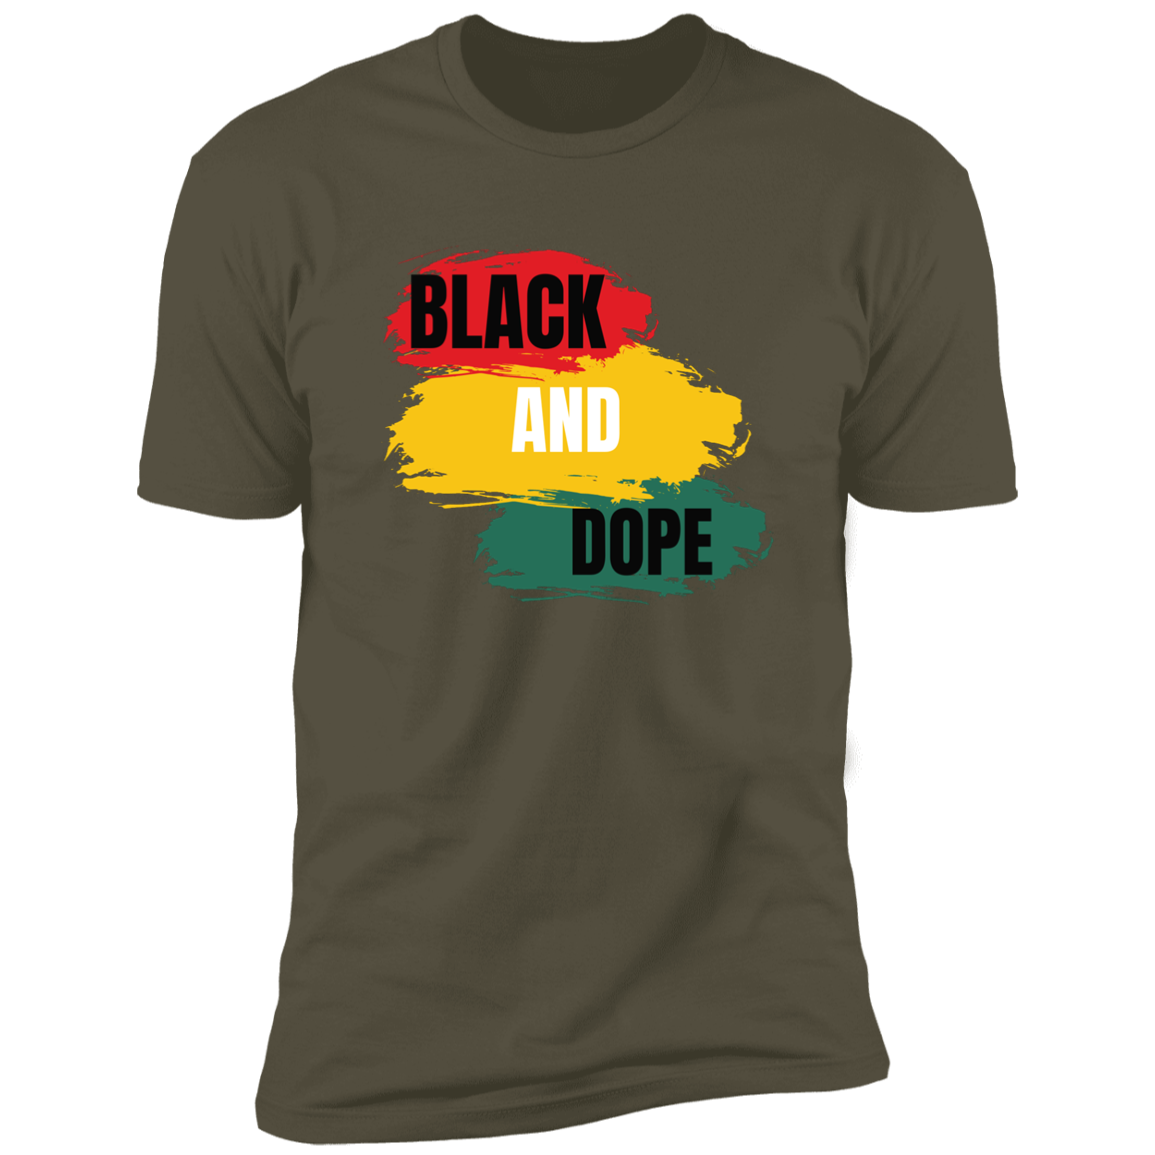 Black and Dope Tee